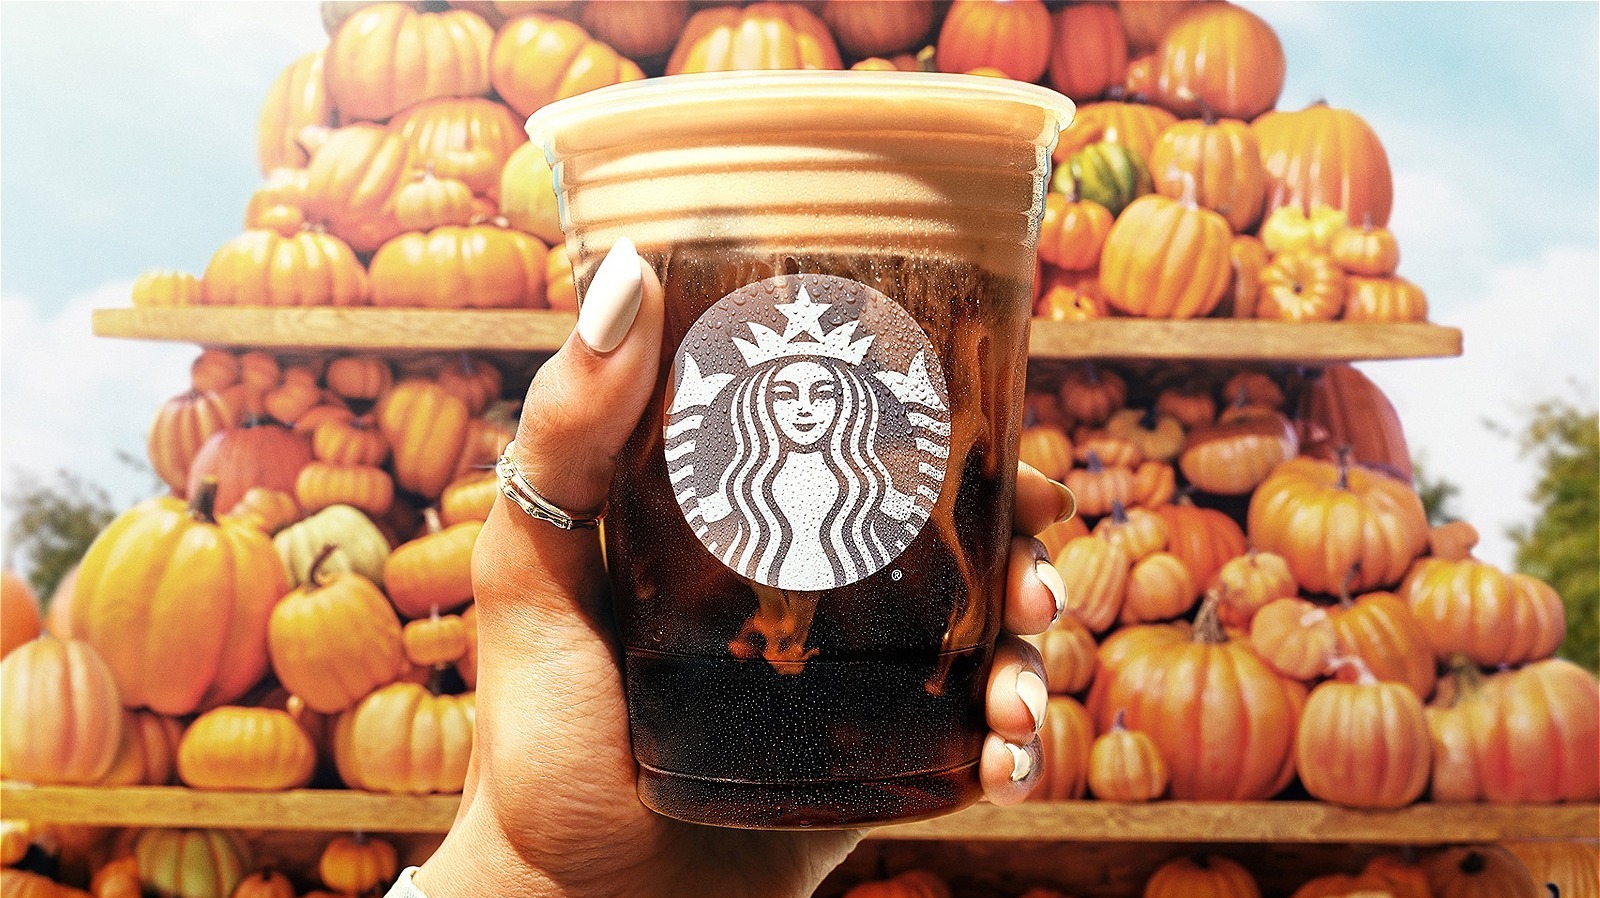 https://www.mashed.com/img/gallery/starbucks-fall-flavors-are-coming-early-to-grocery-stores/l-intro-1660173450.jpg